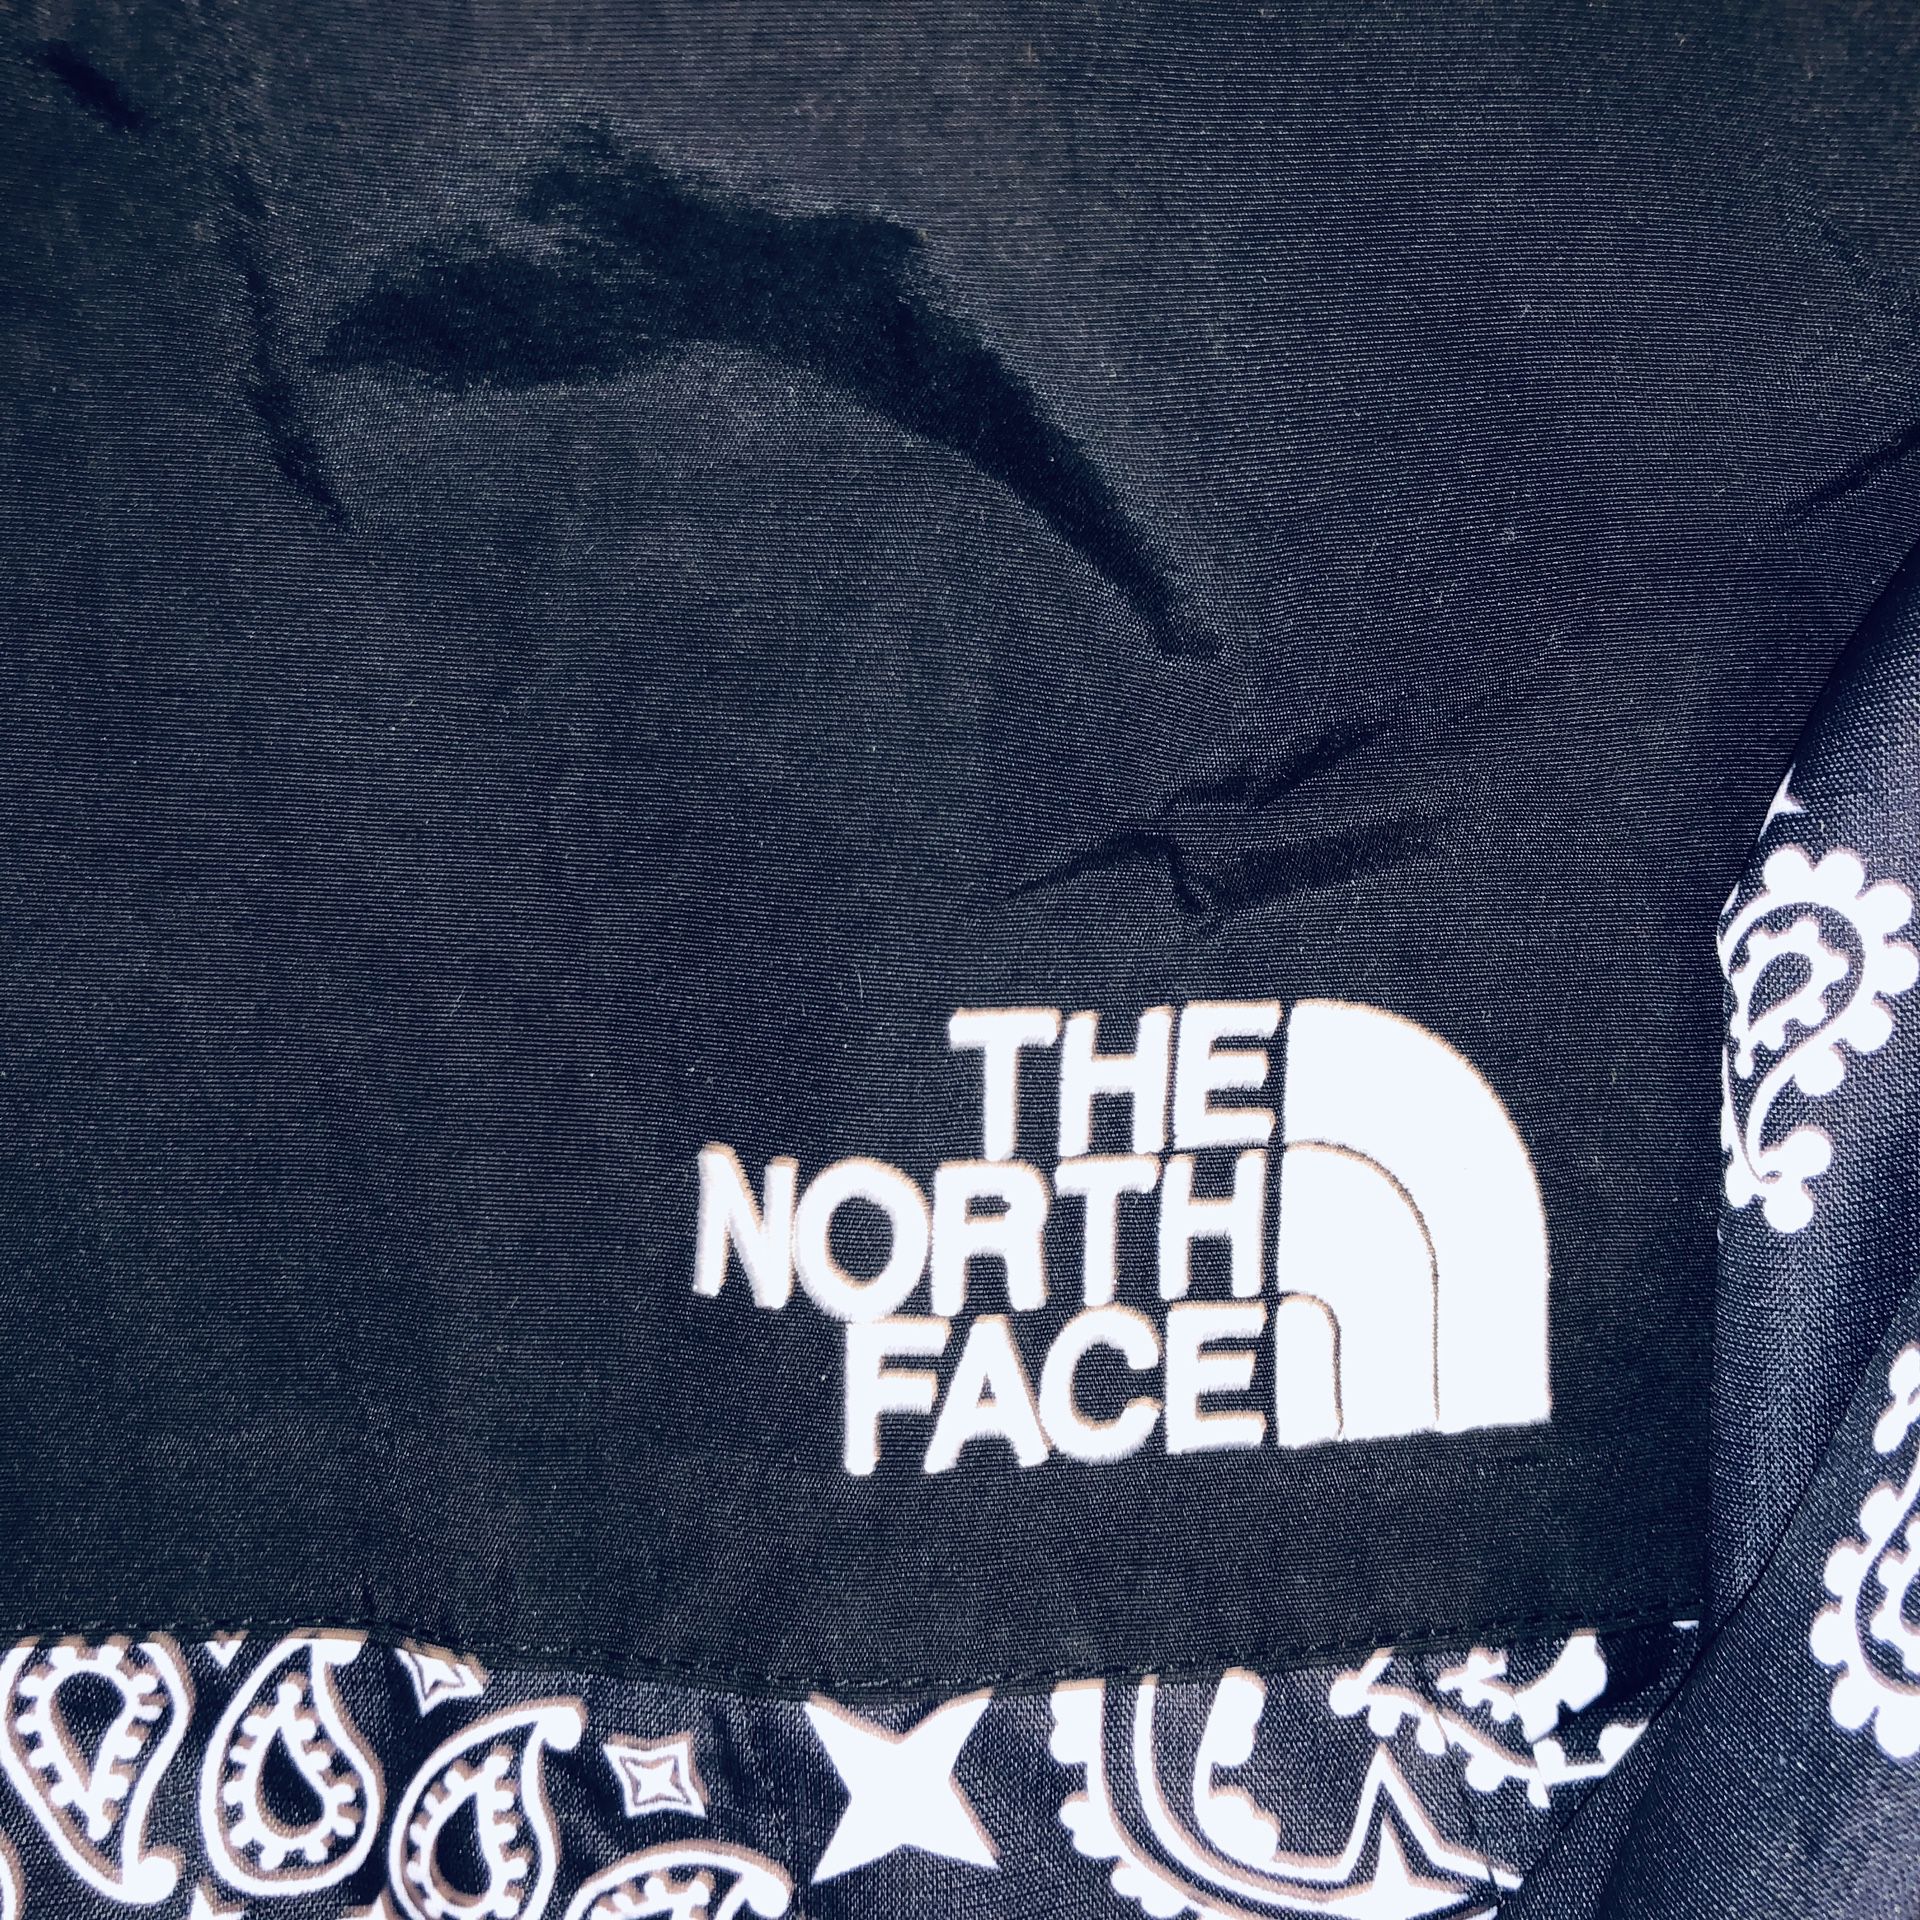 Supreme North Face Paisley Jacket available in store. 💙🖤